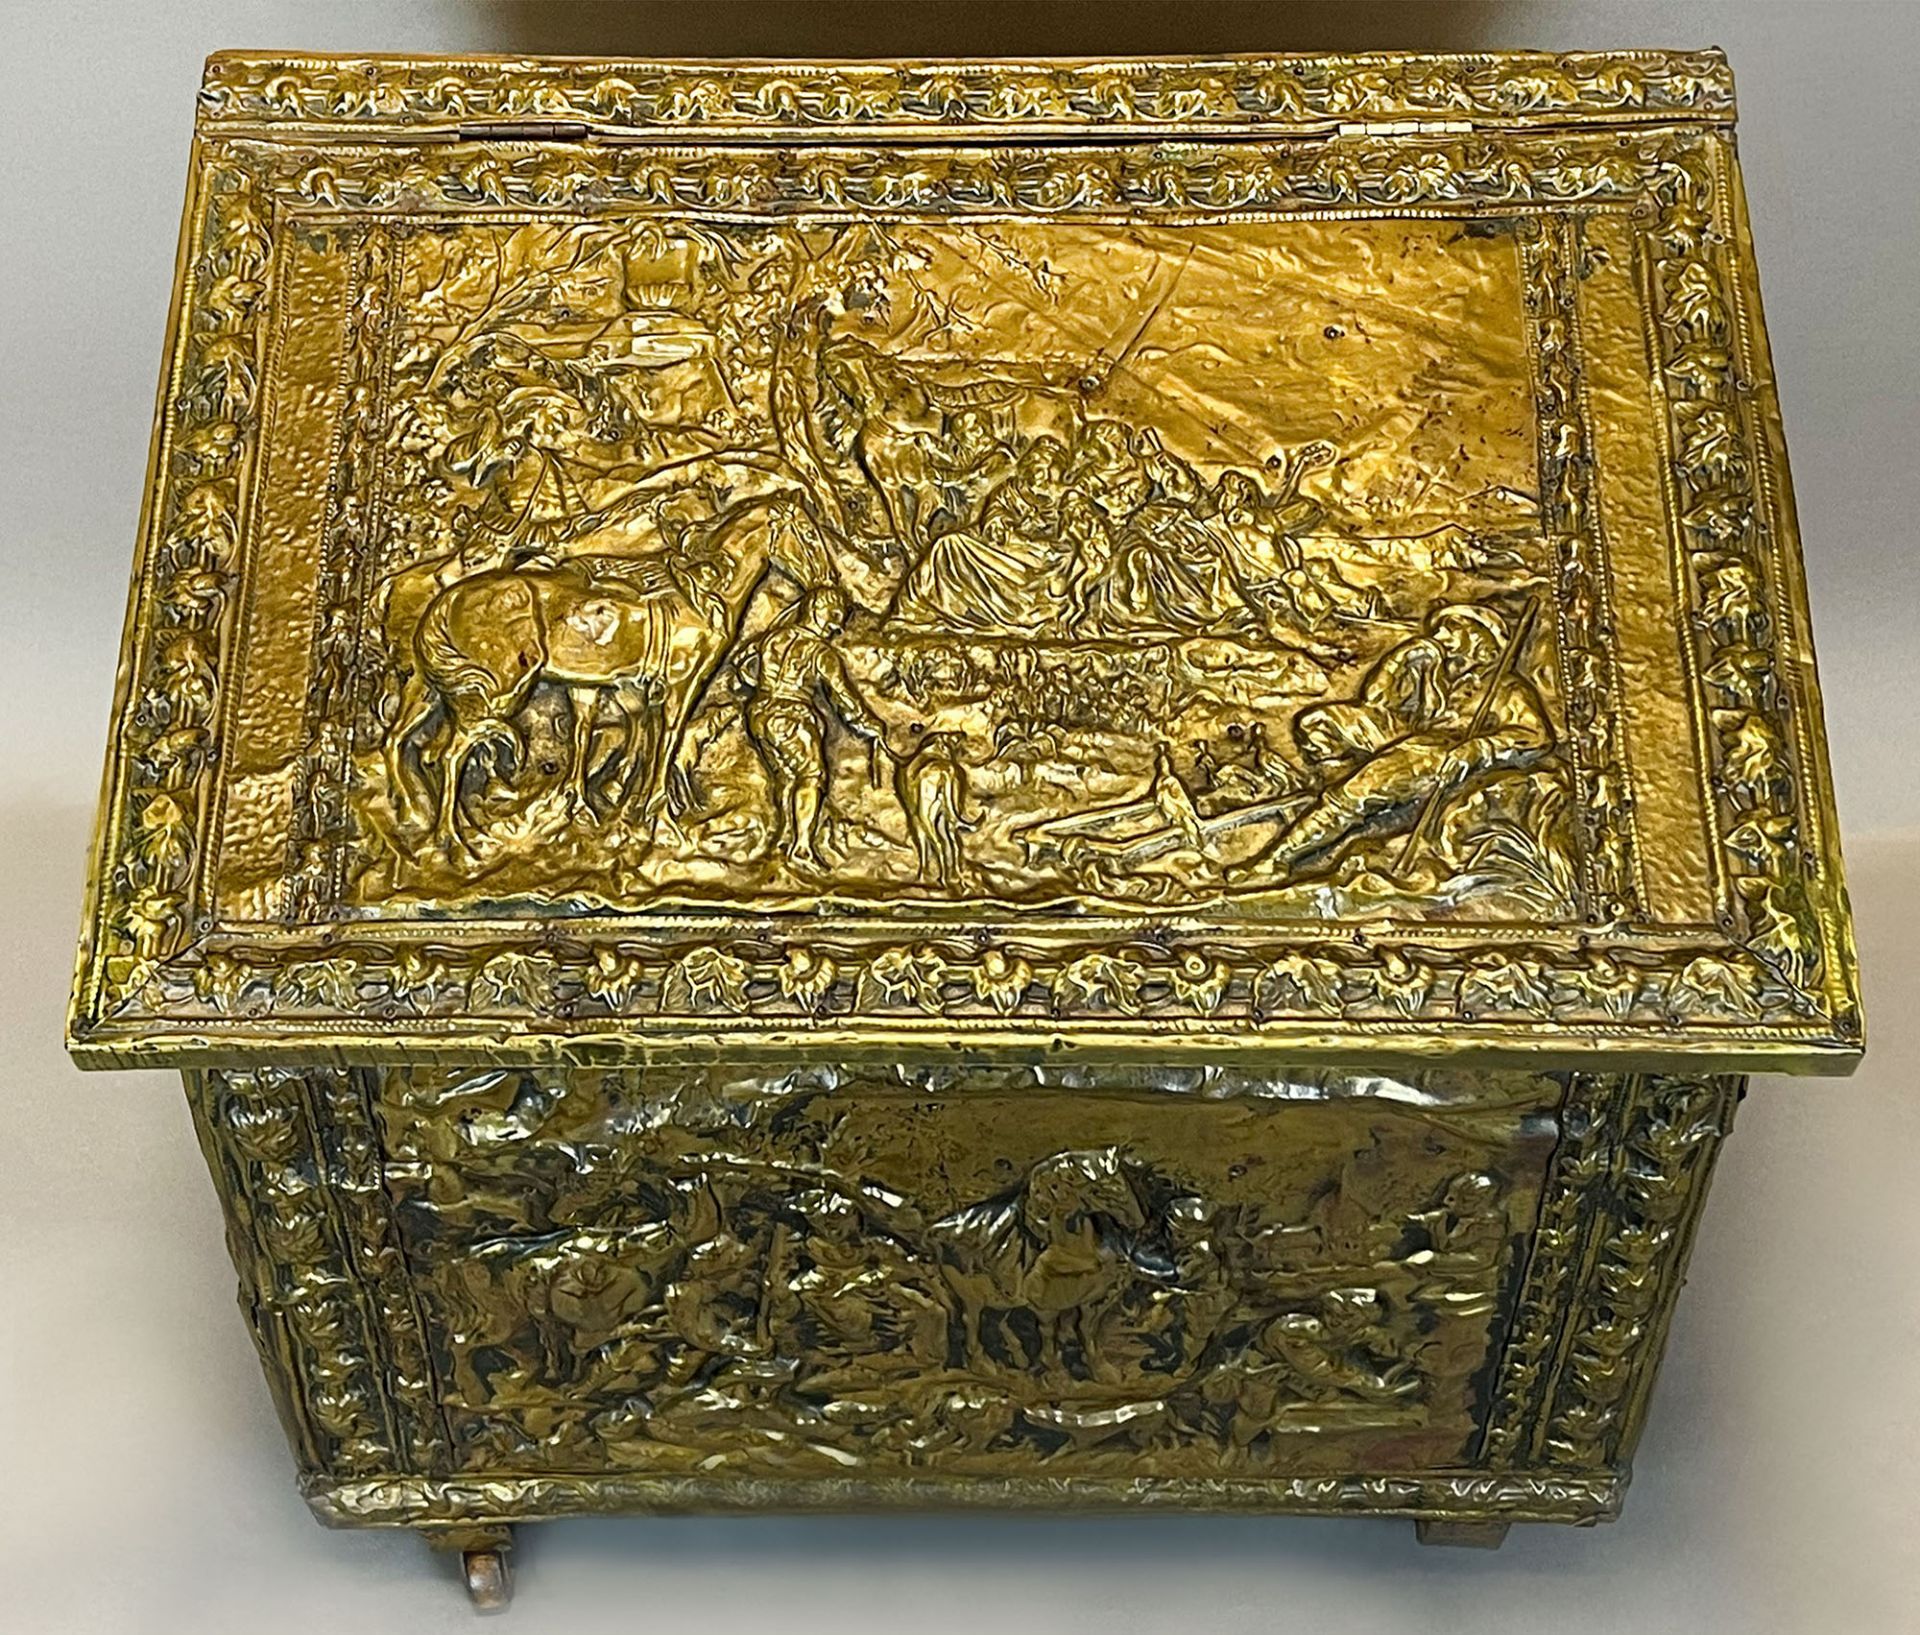 Small wooden chest with brass plate decoration. Probably 19th century. - Image 2 of 15